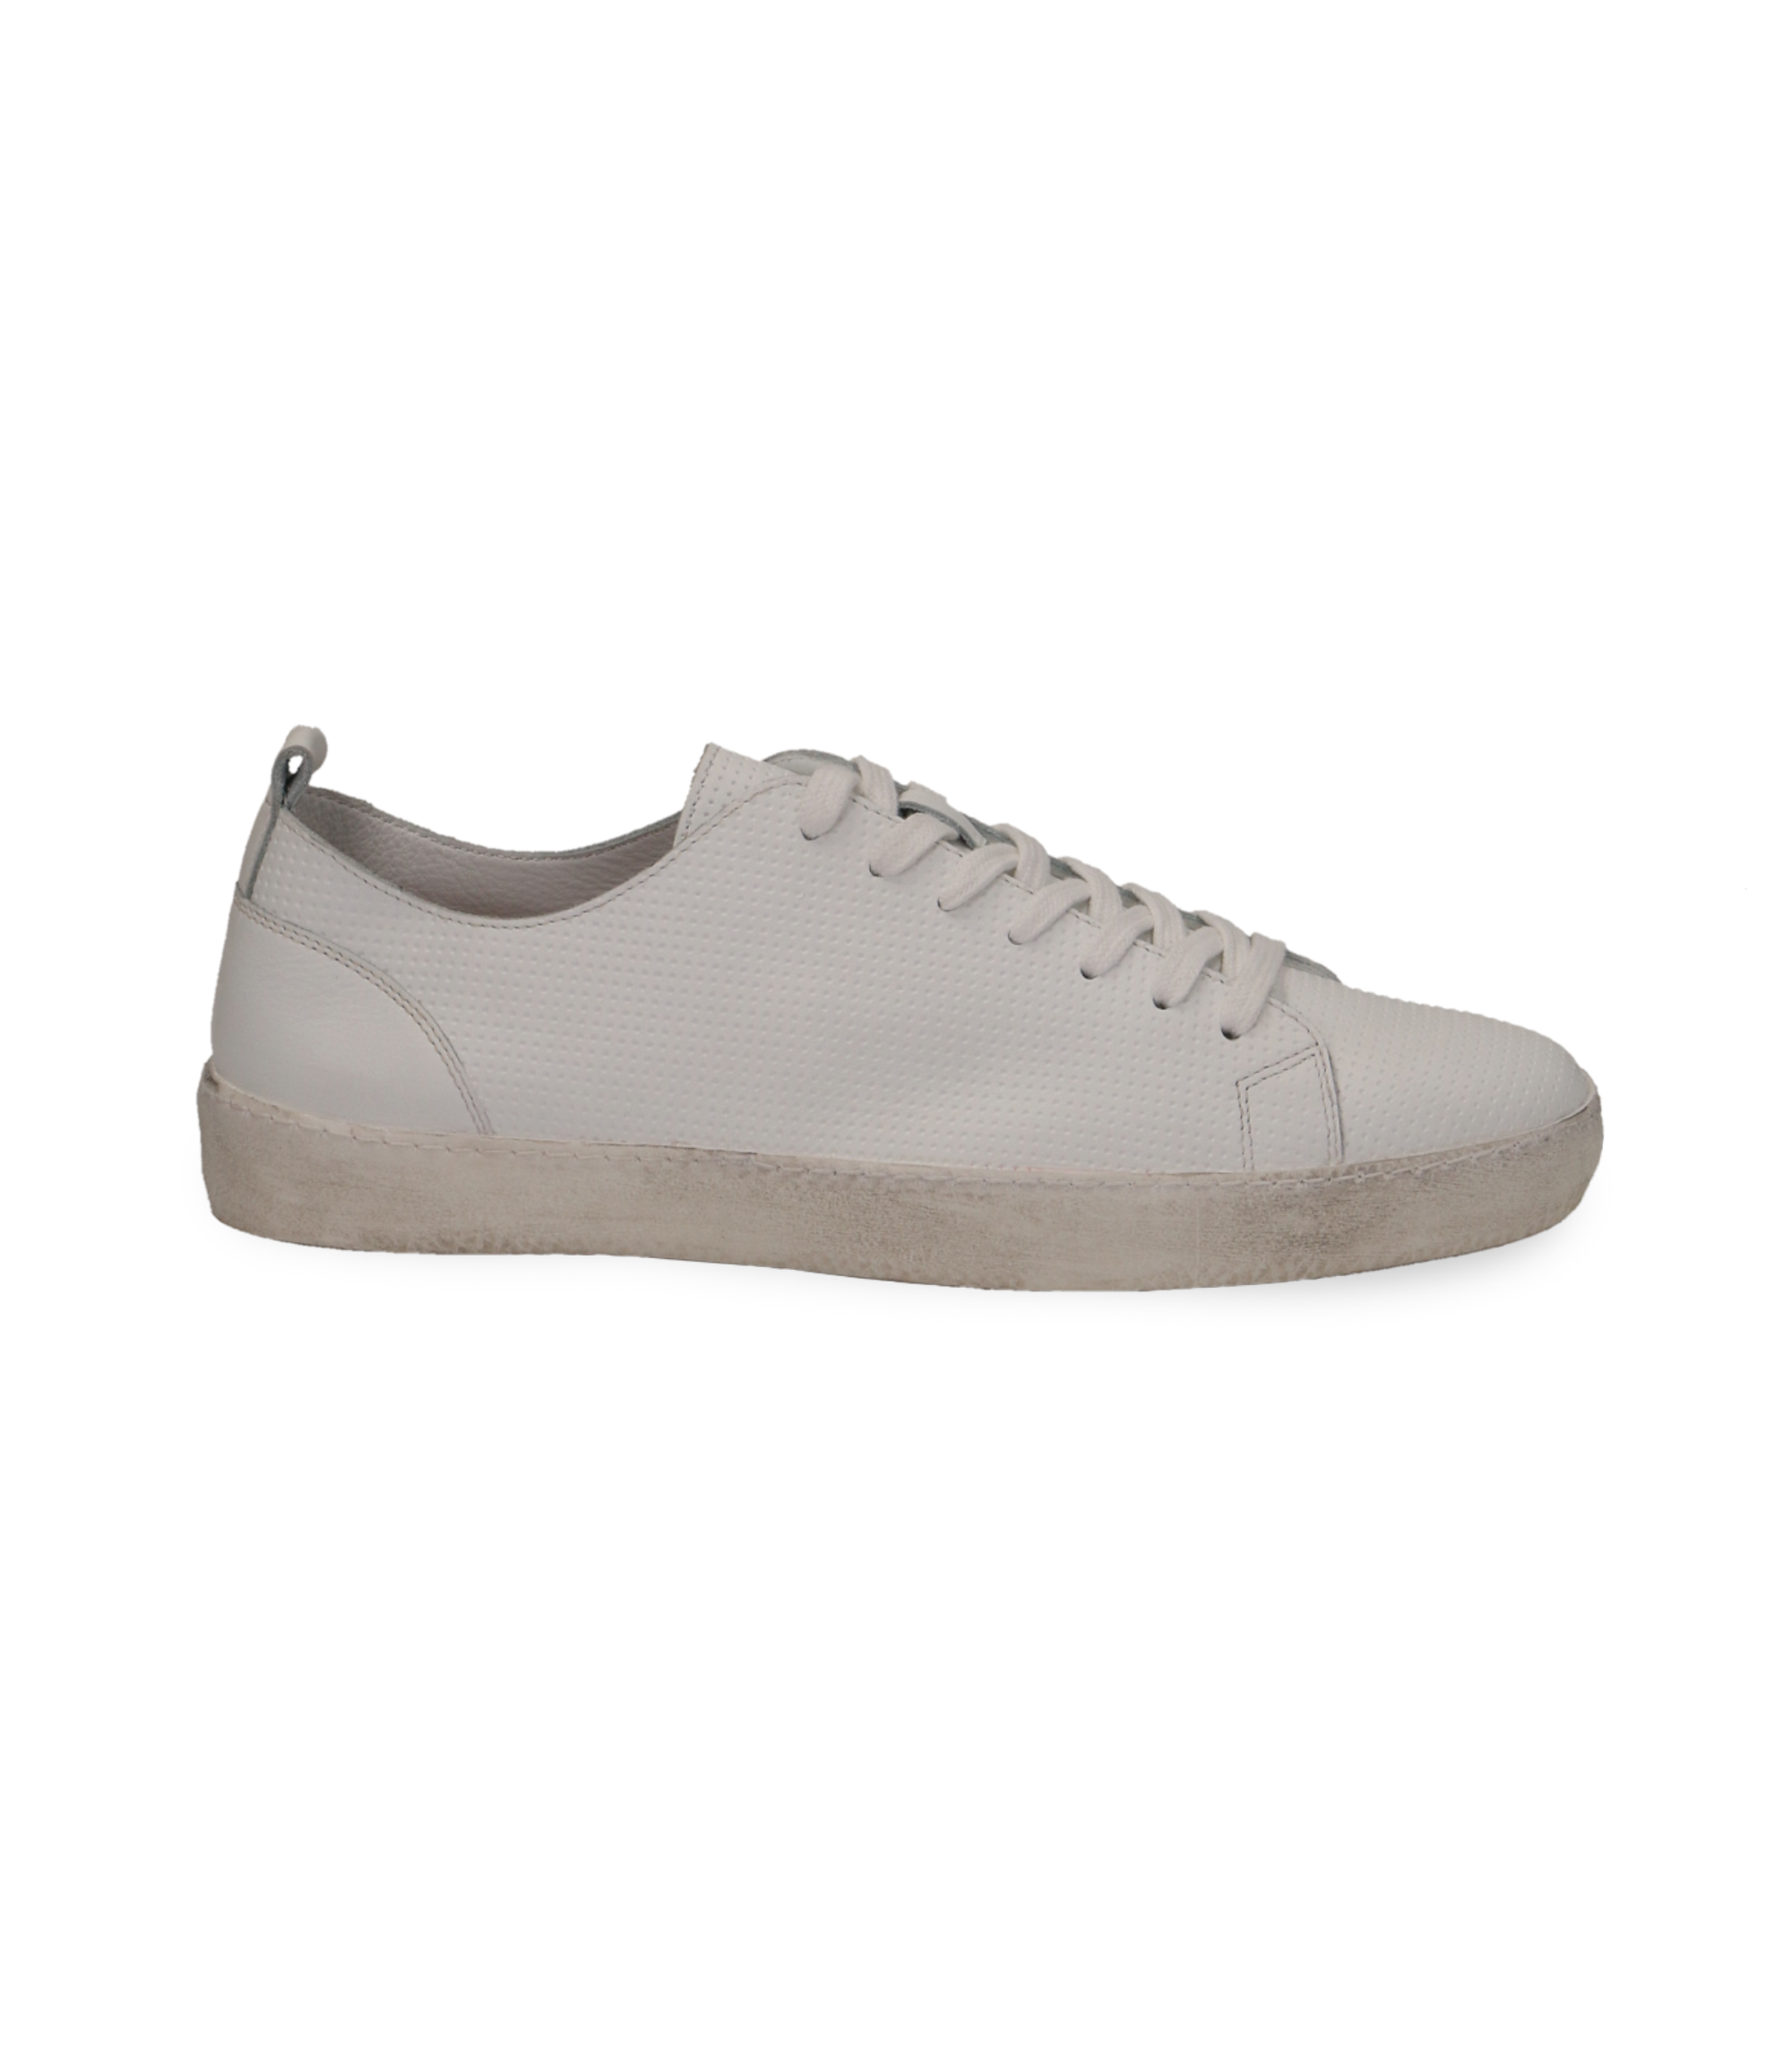 sneakers uomo bianche 2019